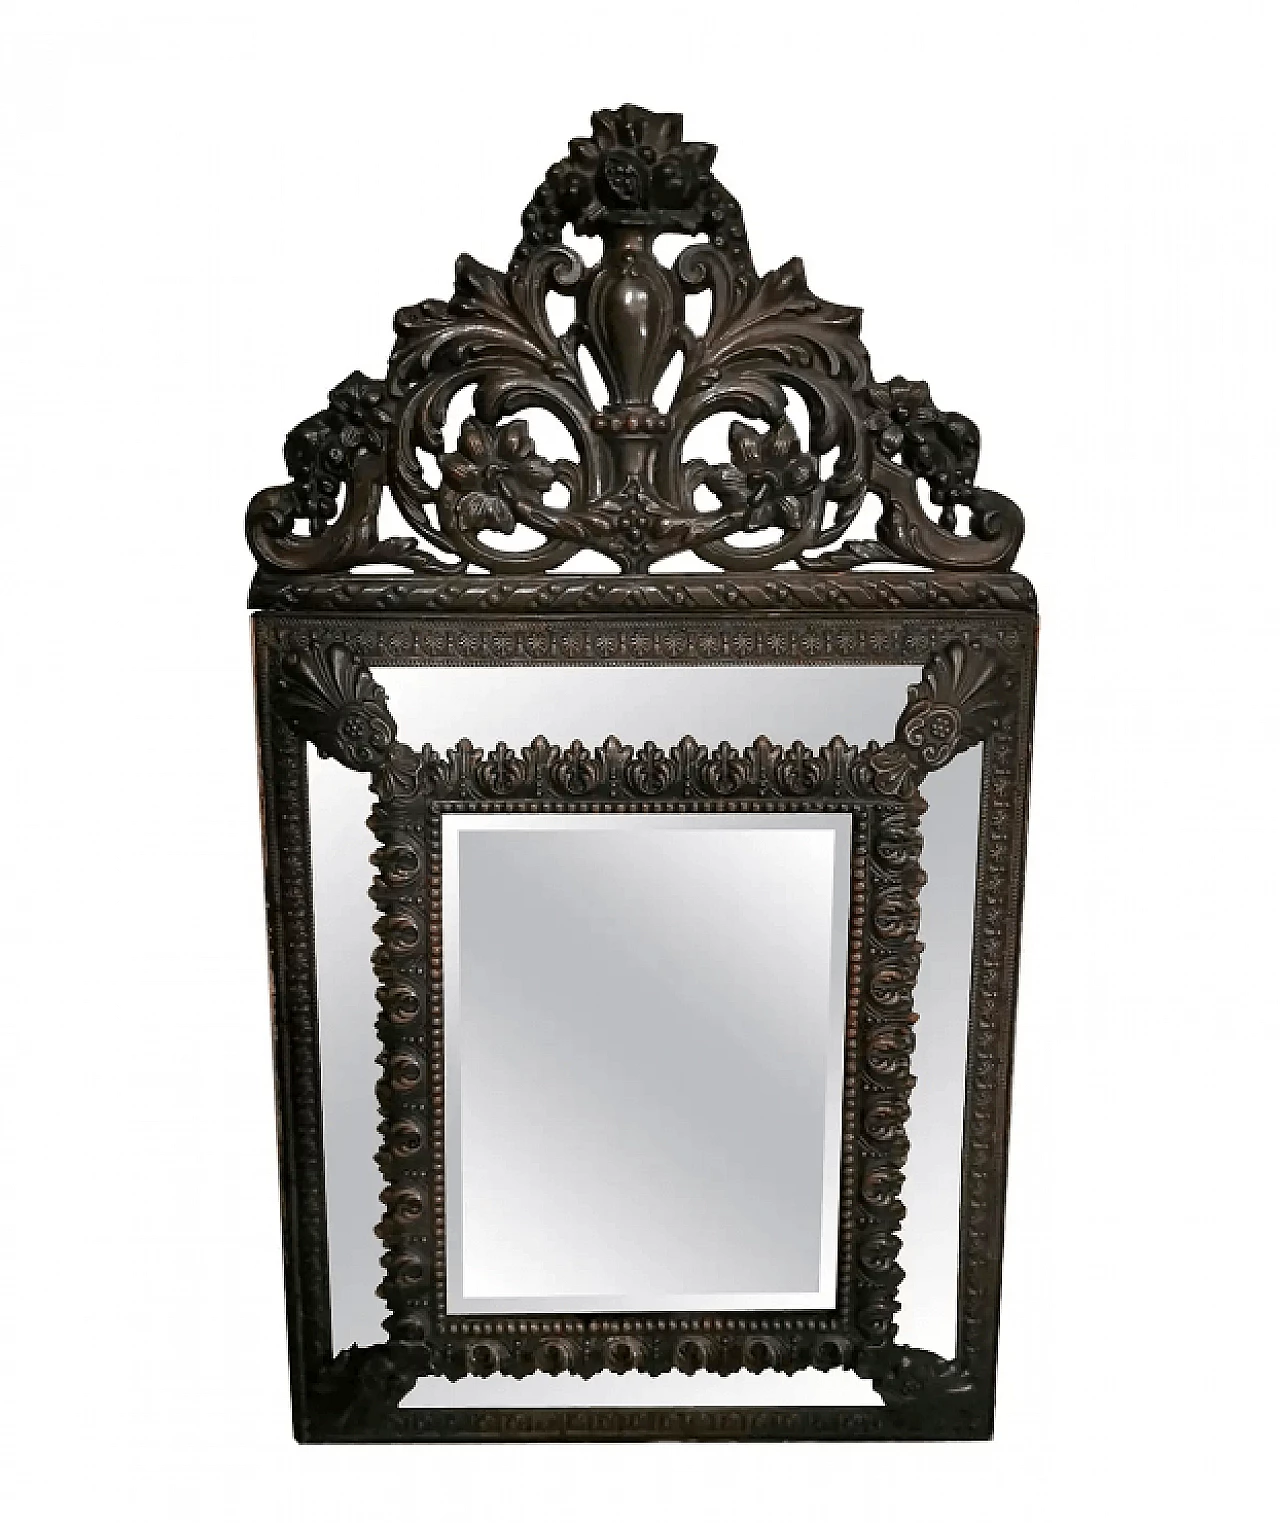 Napoleon III style wall mirror with Repoussé work in burnished brass, 19th century 1